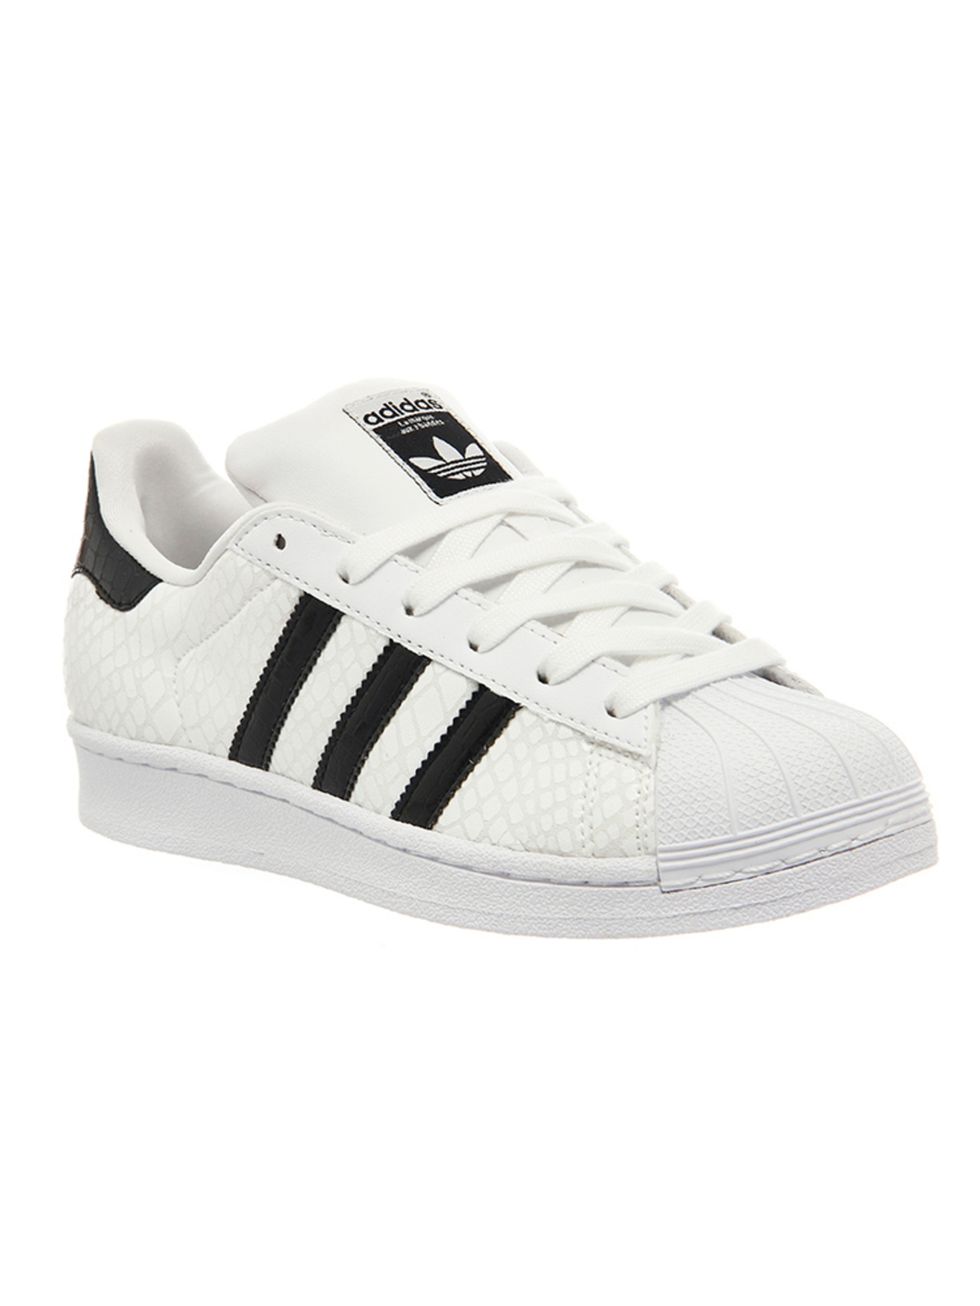 <p>A pair of classic Adidas trainers are a wardrobe must-have. If you normally live in heels, your feet will thank you for it!</p>

<p>Superstar 1 by Adidas, £69.99, <a href="http://www.office.co.uk/view/product/office_catalog/5,21/2114612549" target="_bl